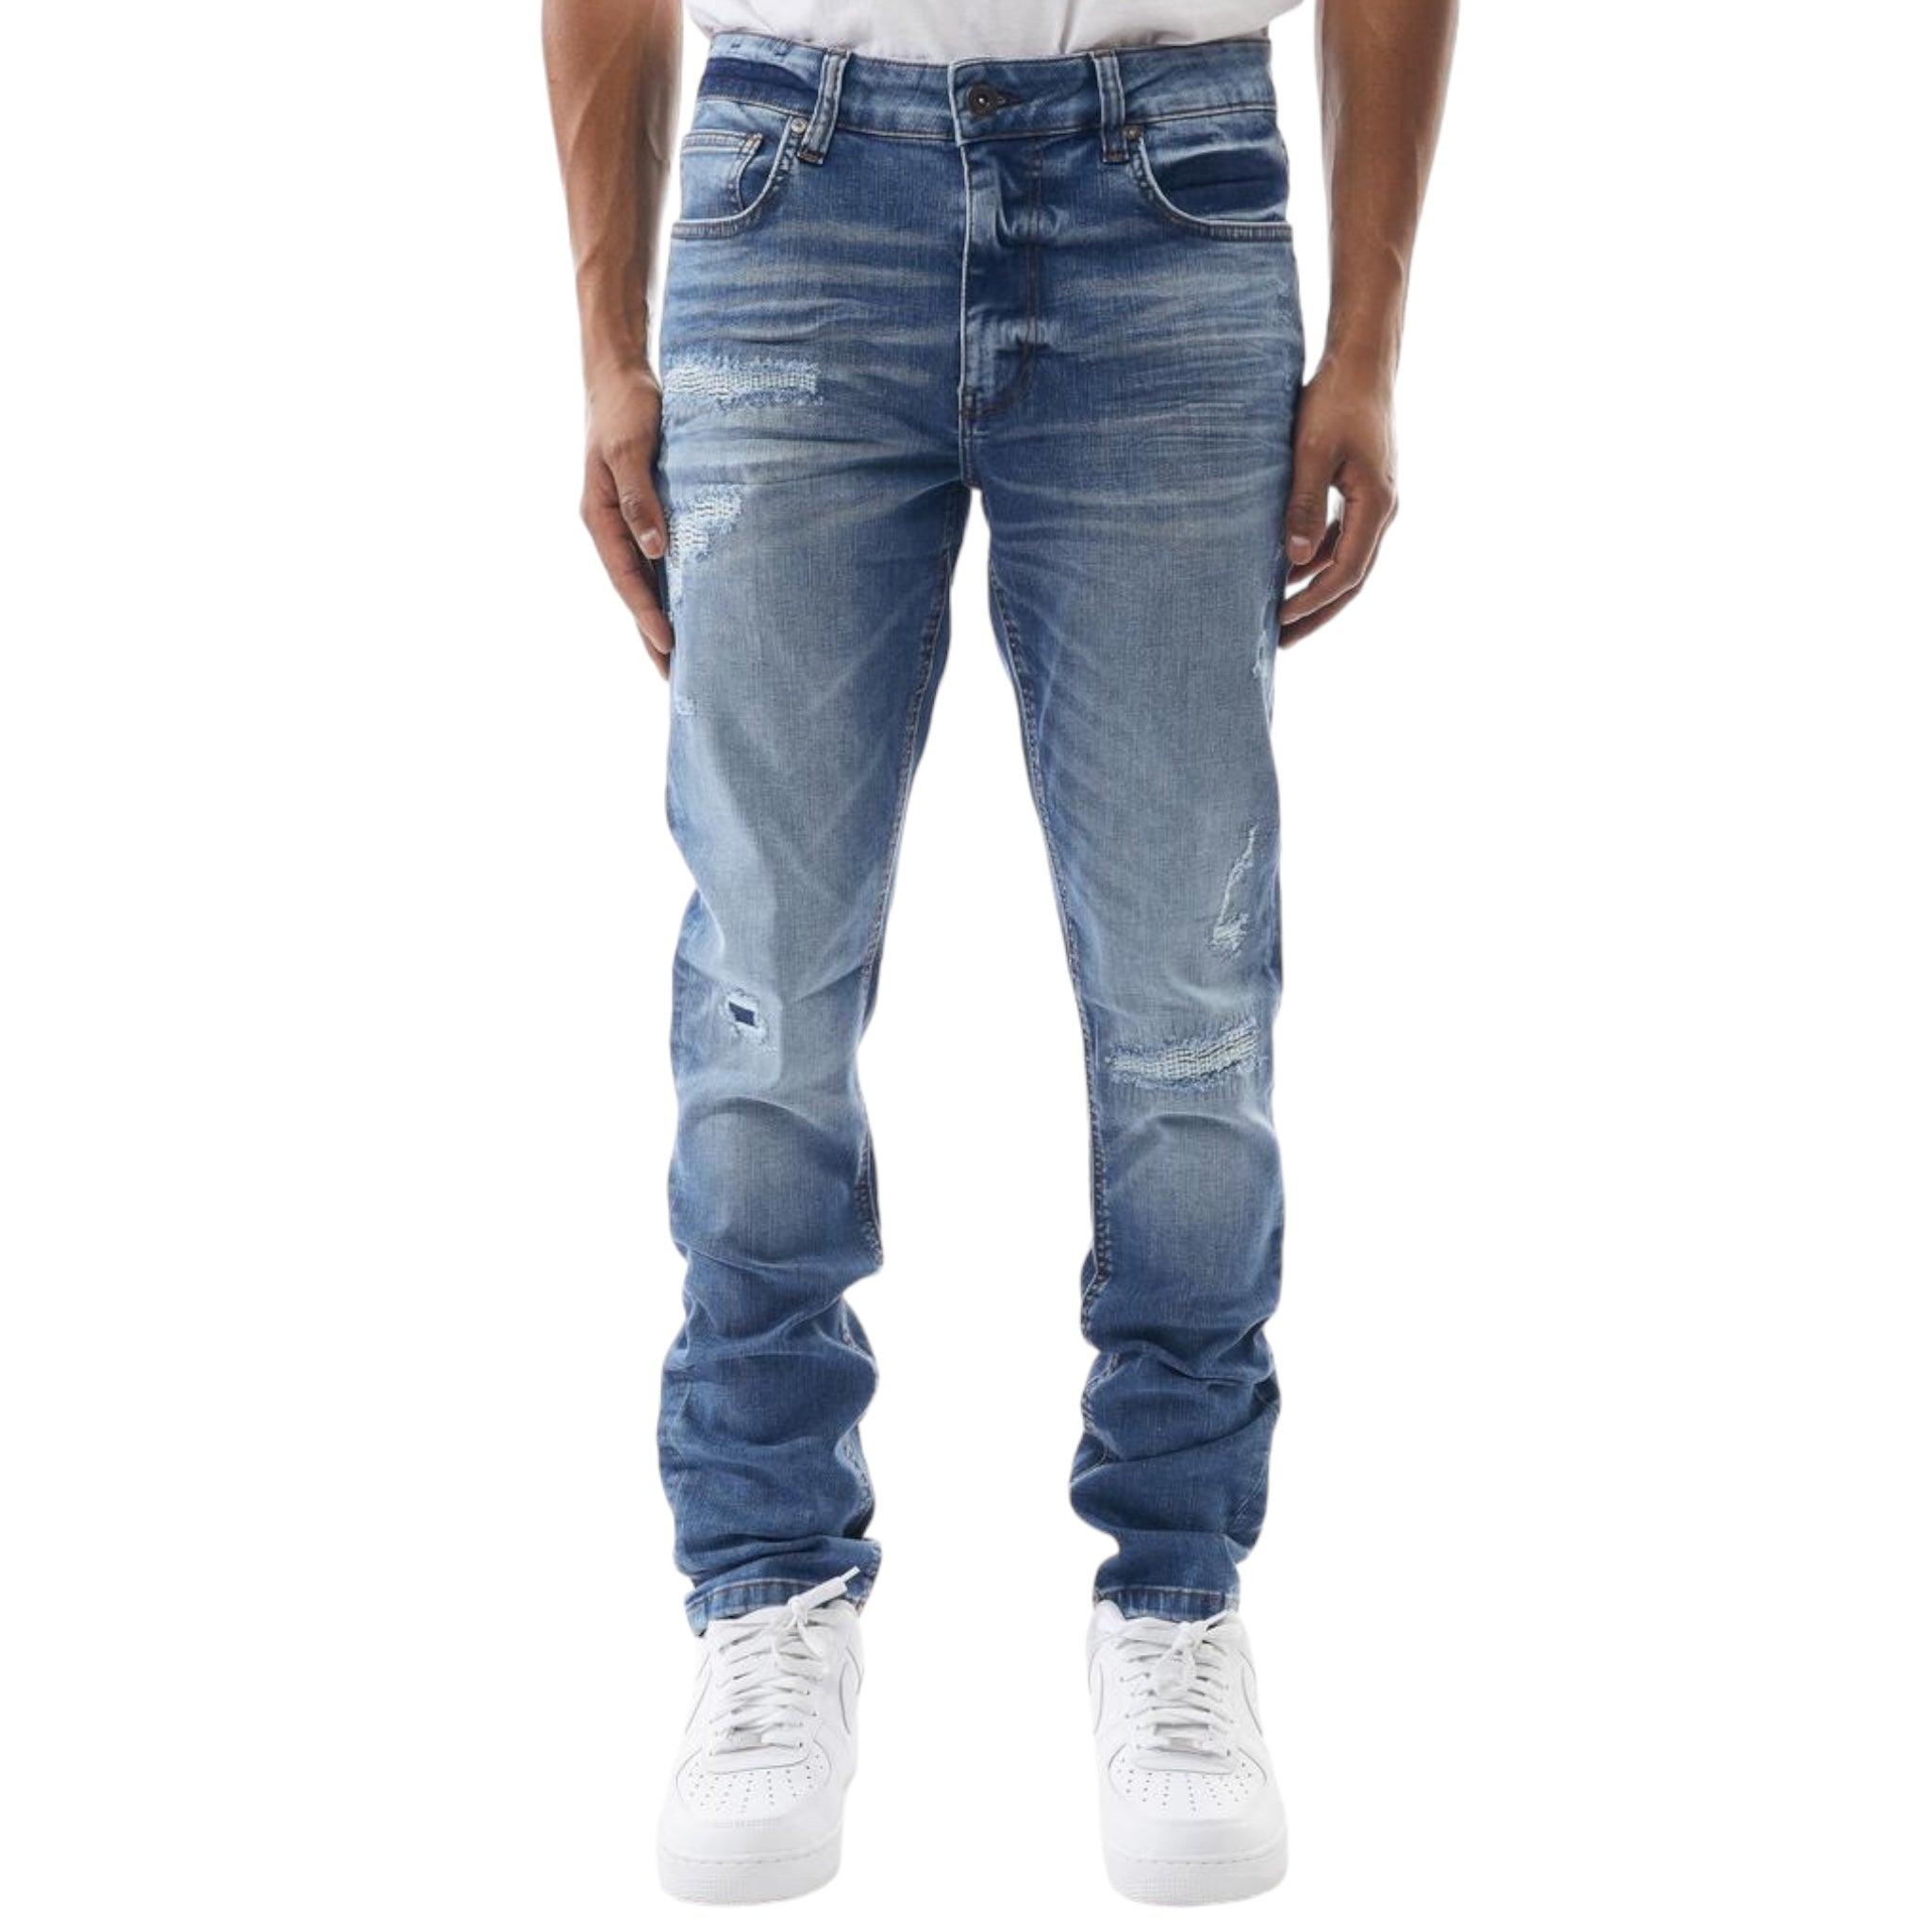 M. SOCIETY: Rip Jeans MS-80337